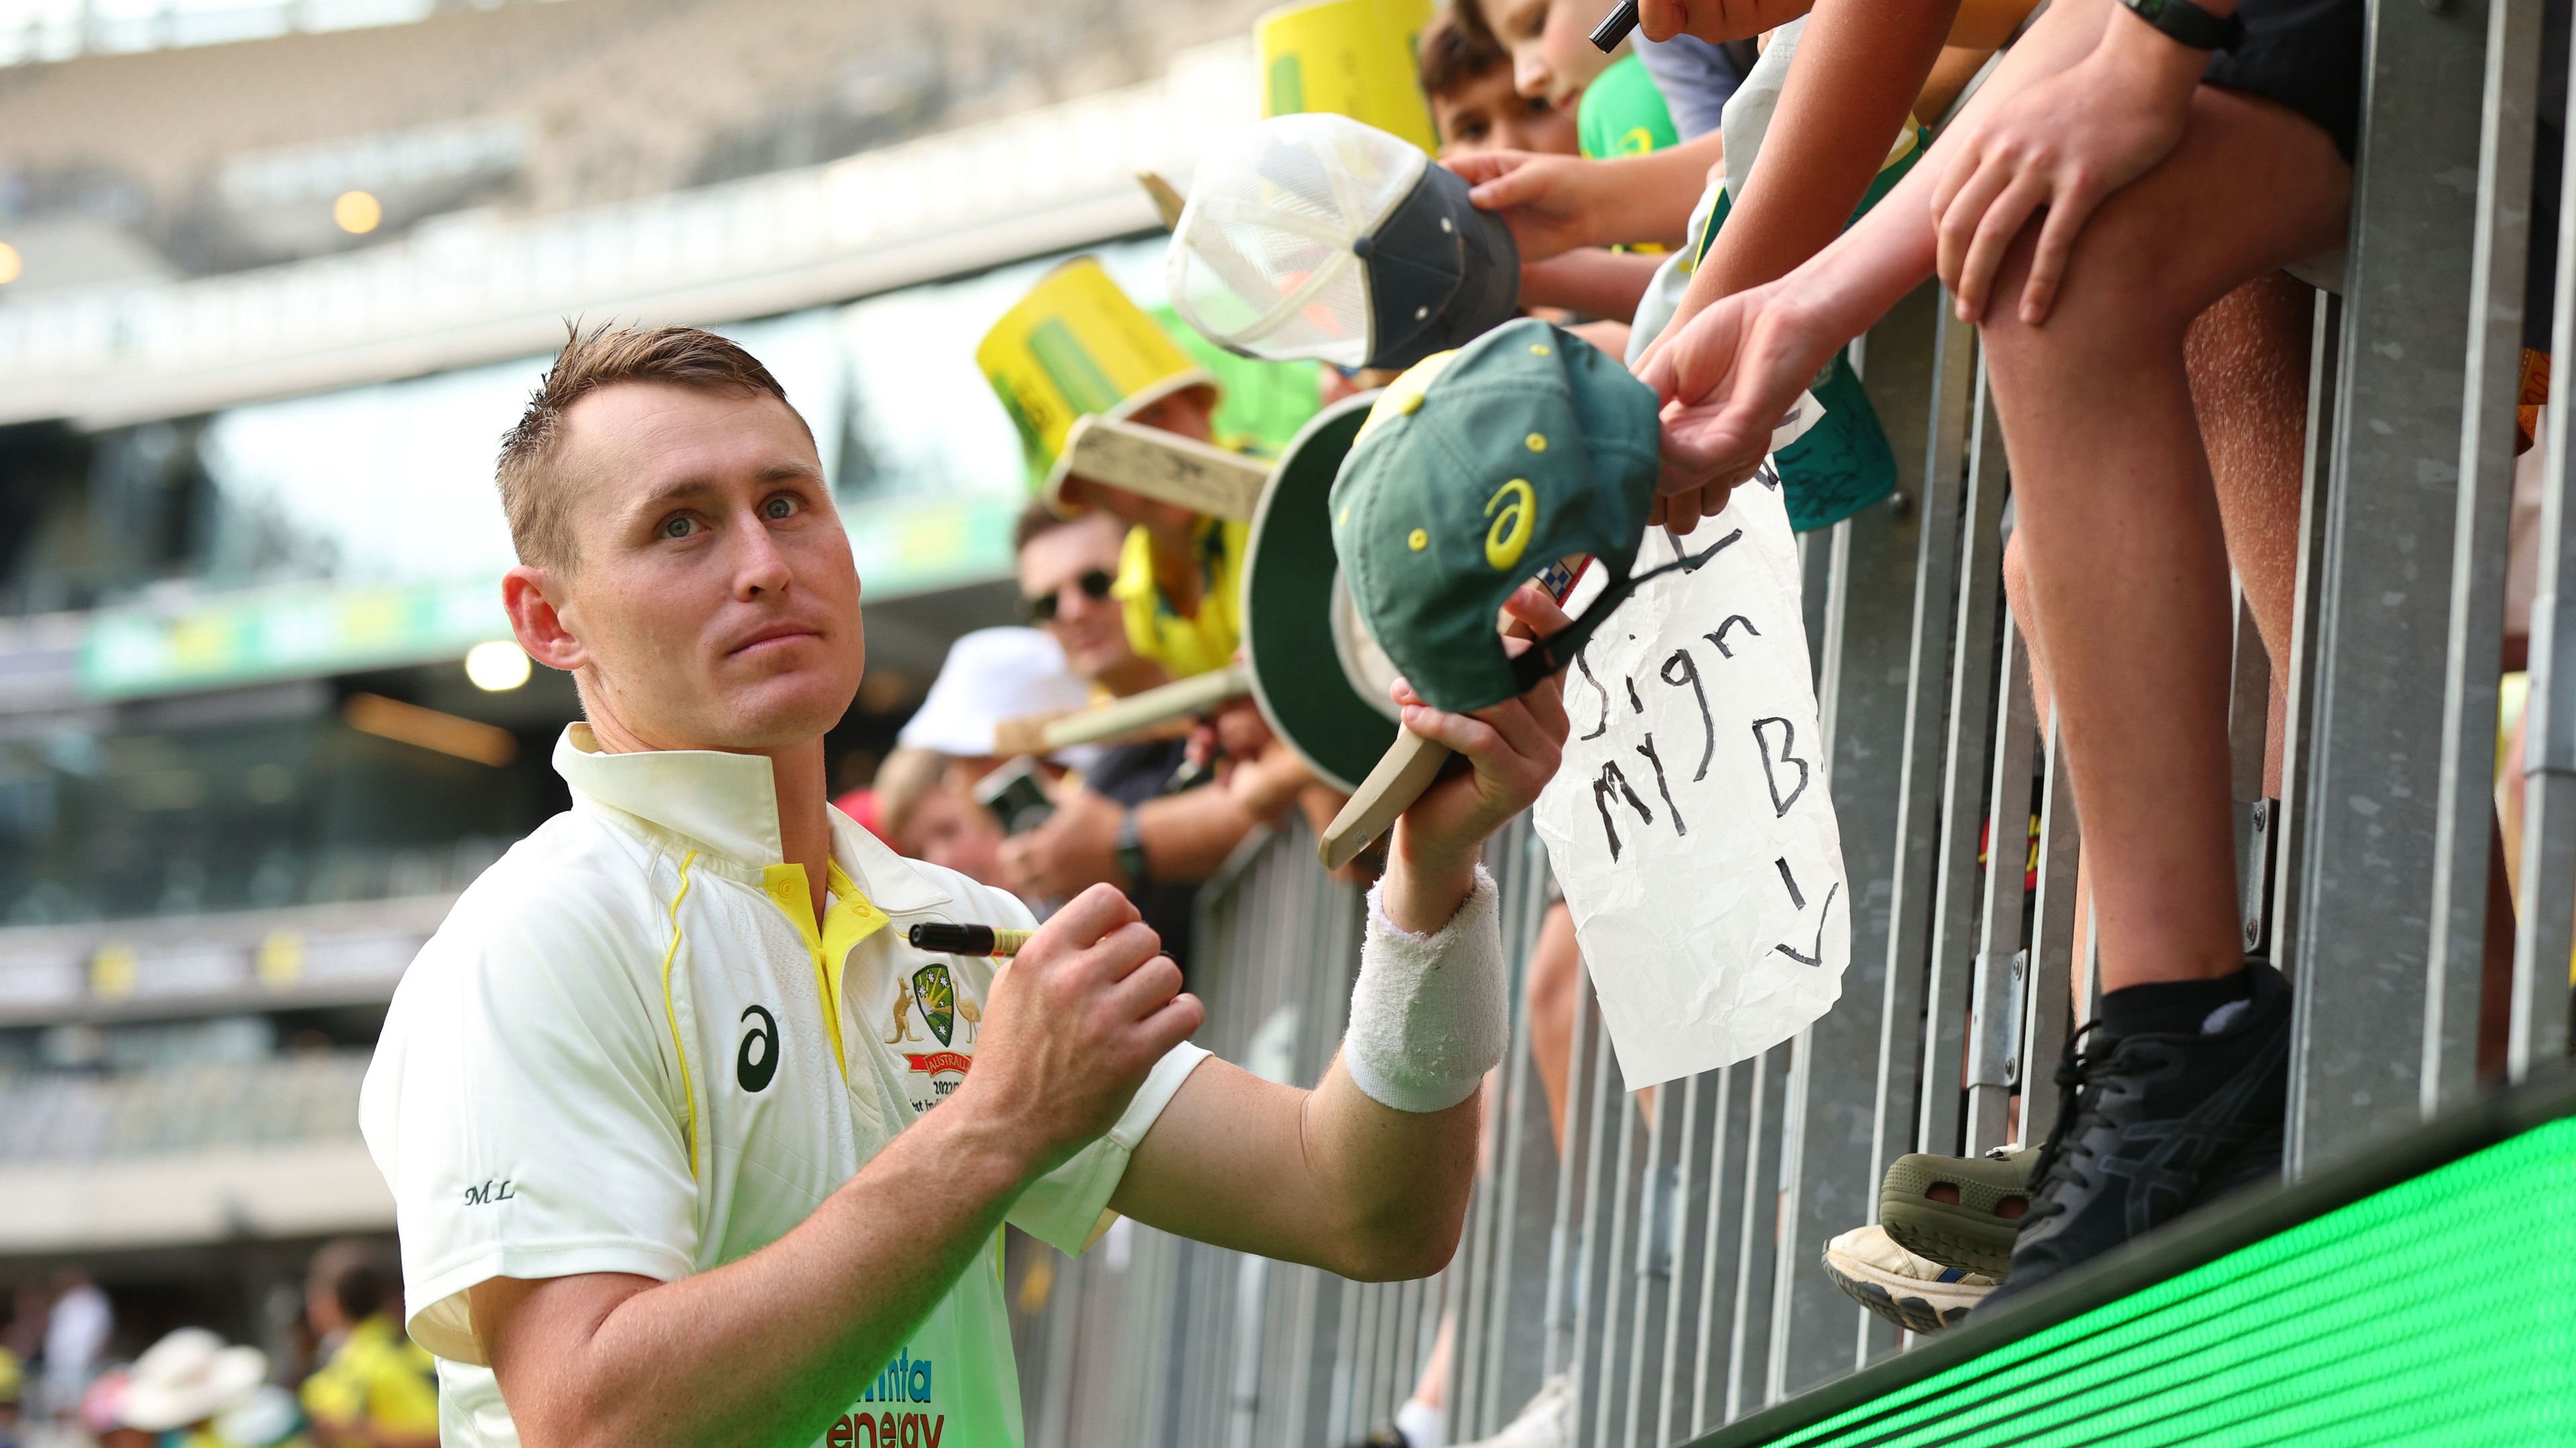 Marnus Labuschagne signs autographs after scoring a century on day one of the Perth Test against West Indies.